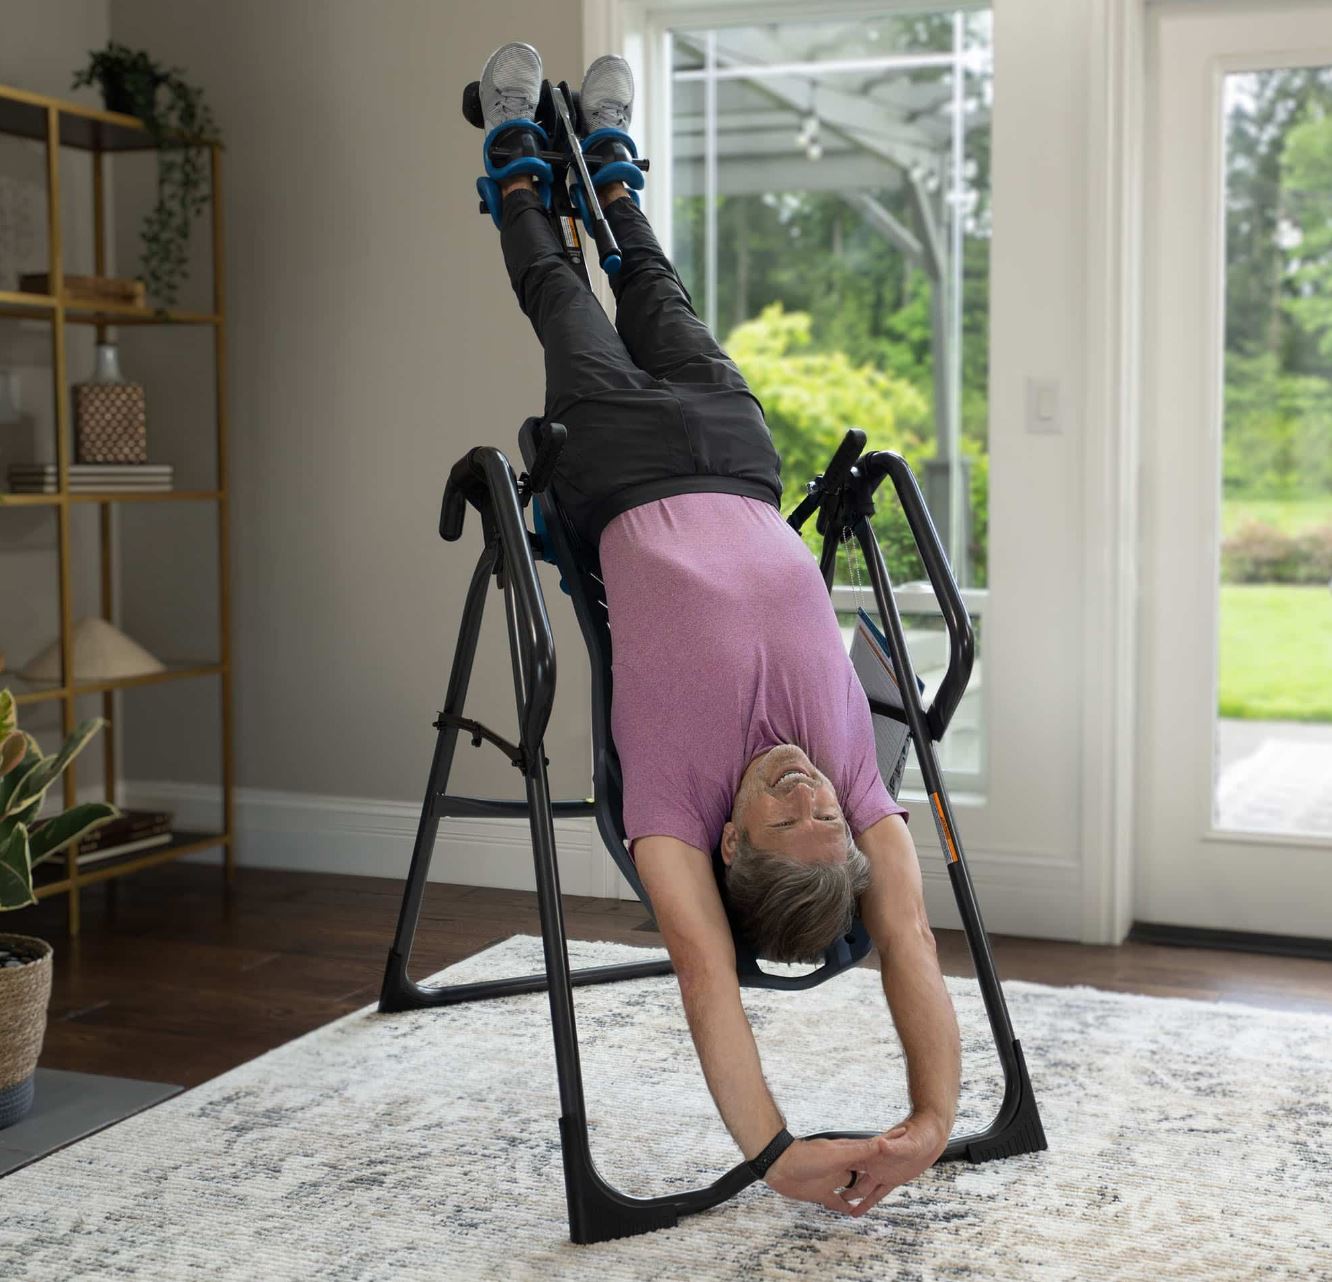 Me hanging upside down using the Teeter FitSpine X3 Inversion Table